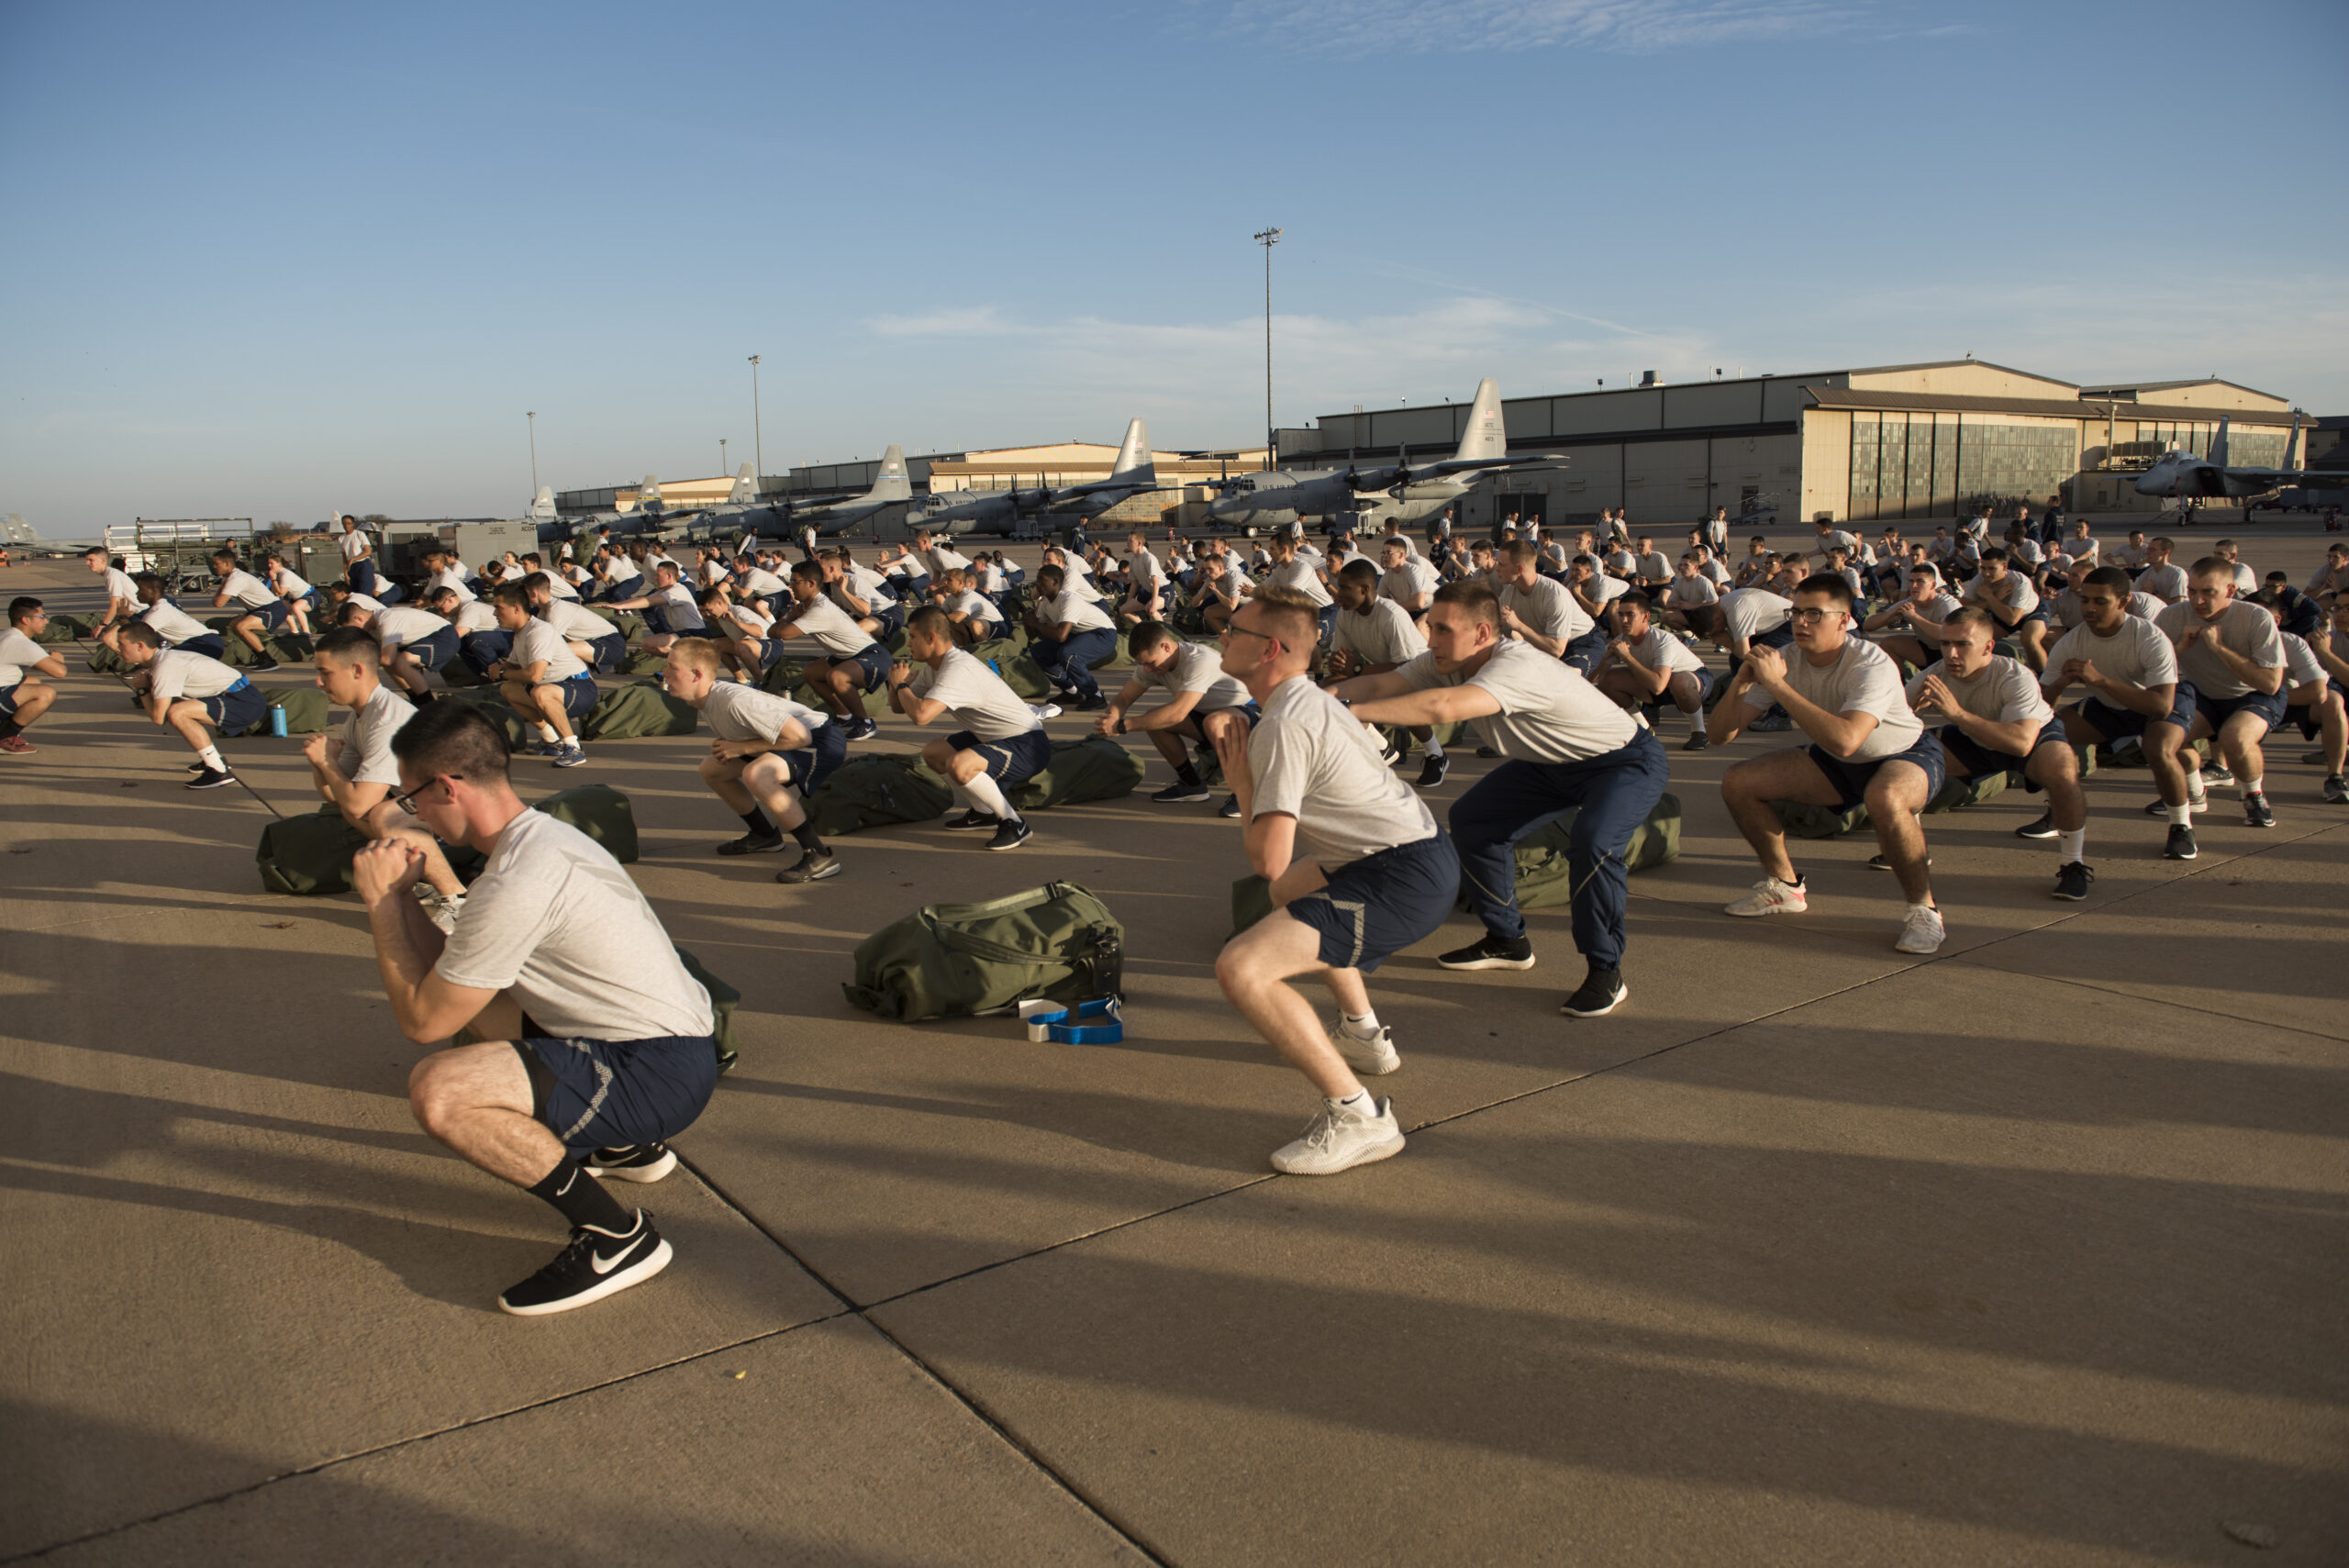 Airmen in the 363rd Training Squadron, perform squats during a physical training (PT) session at Sheppard Air Force Base, Texas, Nov. 30. PT sessions are led by military training leaders (MTL) to ensure Airmen are using proper form during their exercises. (U.S. Air Force photo by Alan R. Quevy)